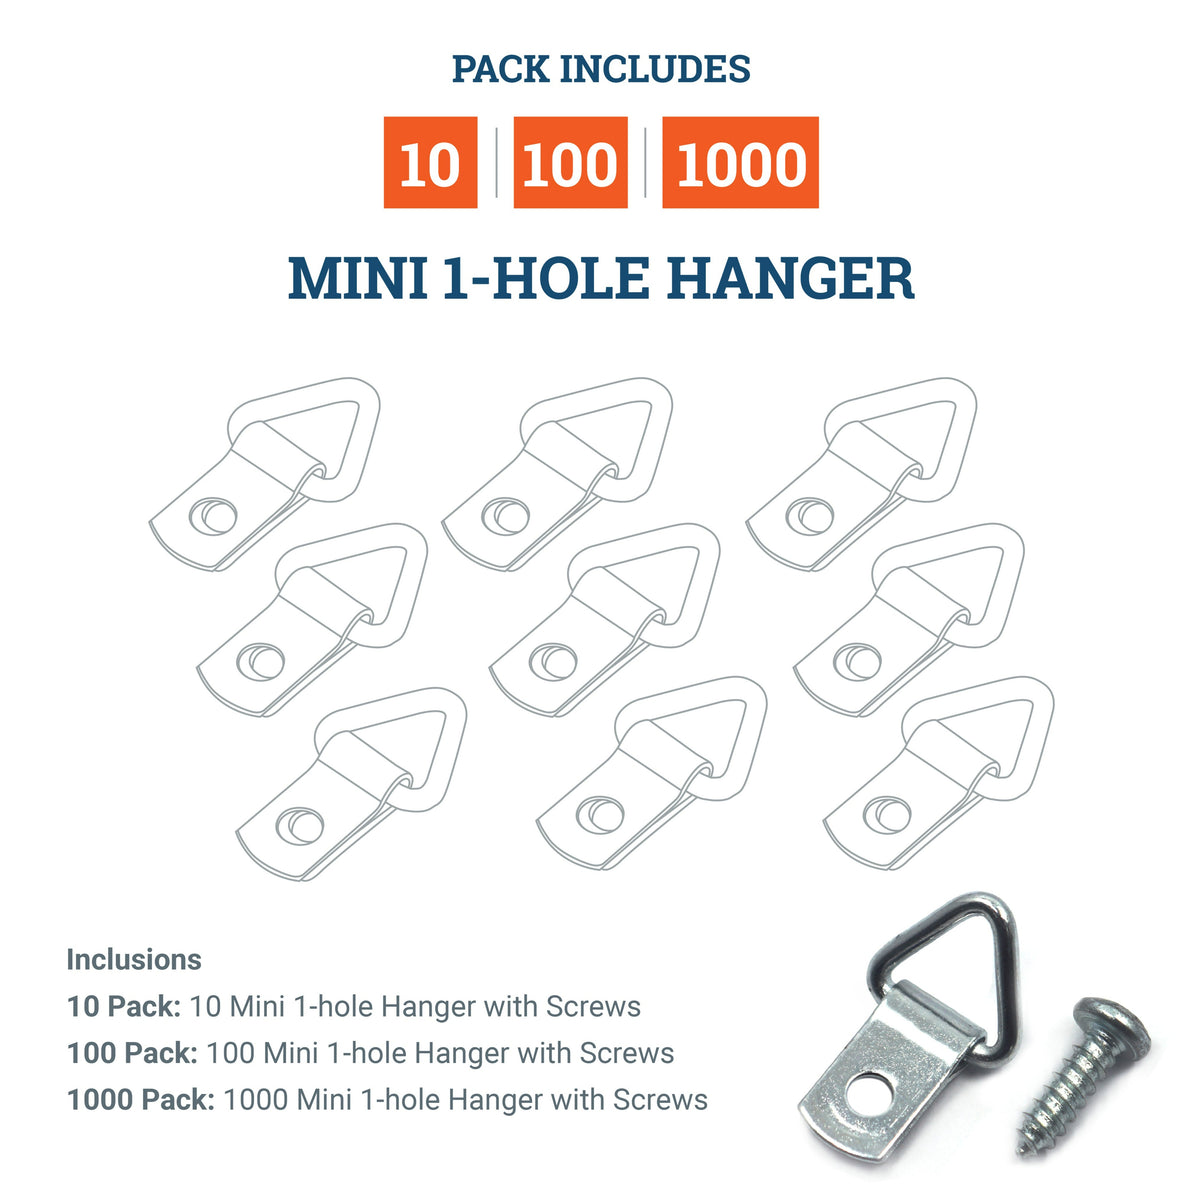 Mini 1-Hole Hanger ***OUT OF STOCK UNTIL JANUARY***